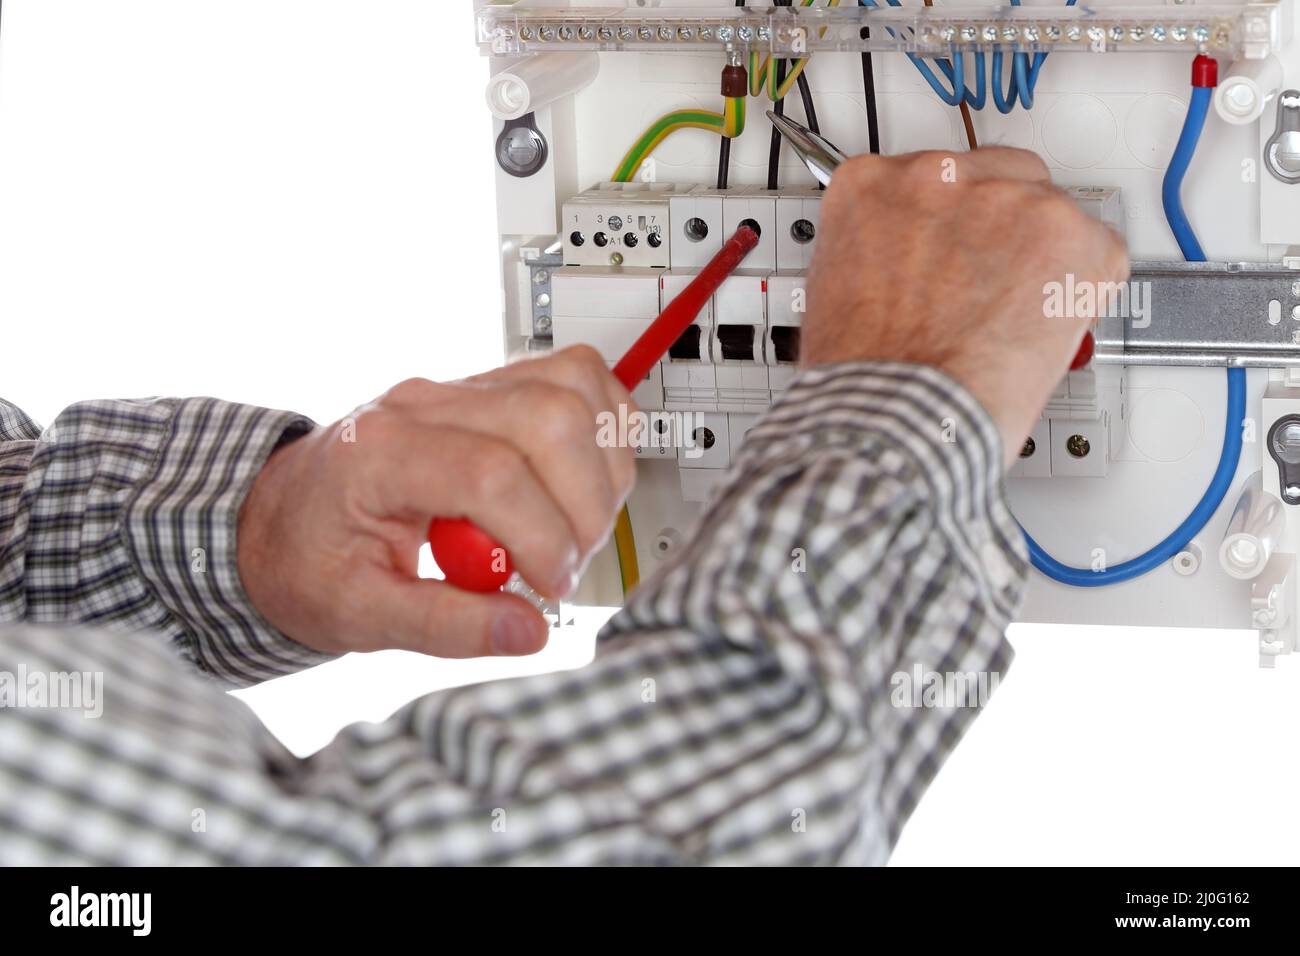 Working on electrical device Stock Photo